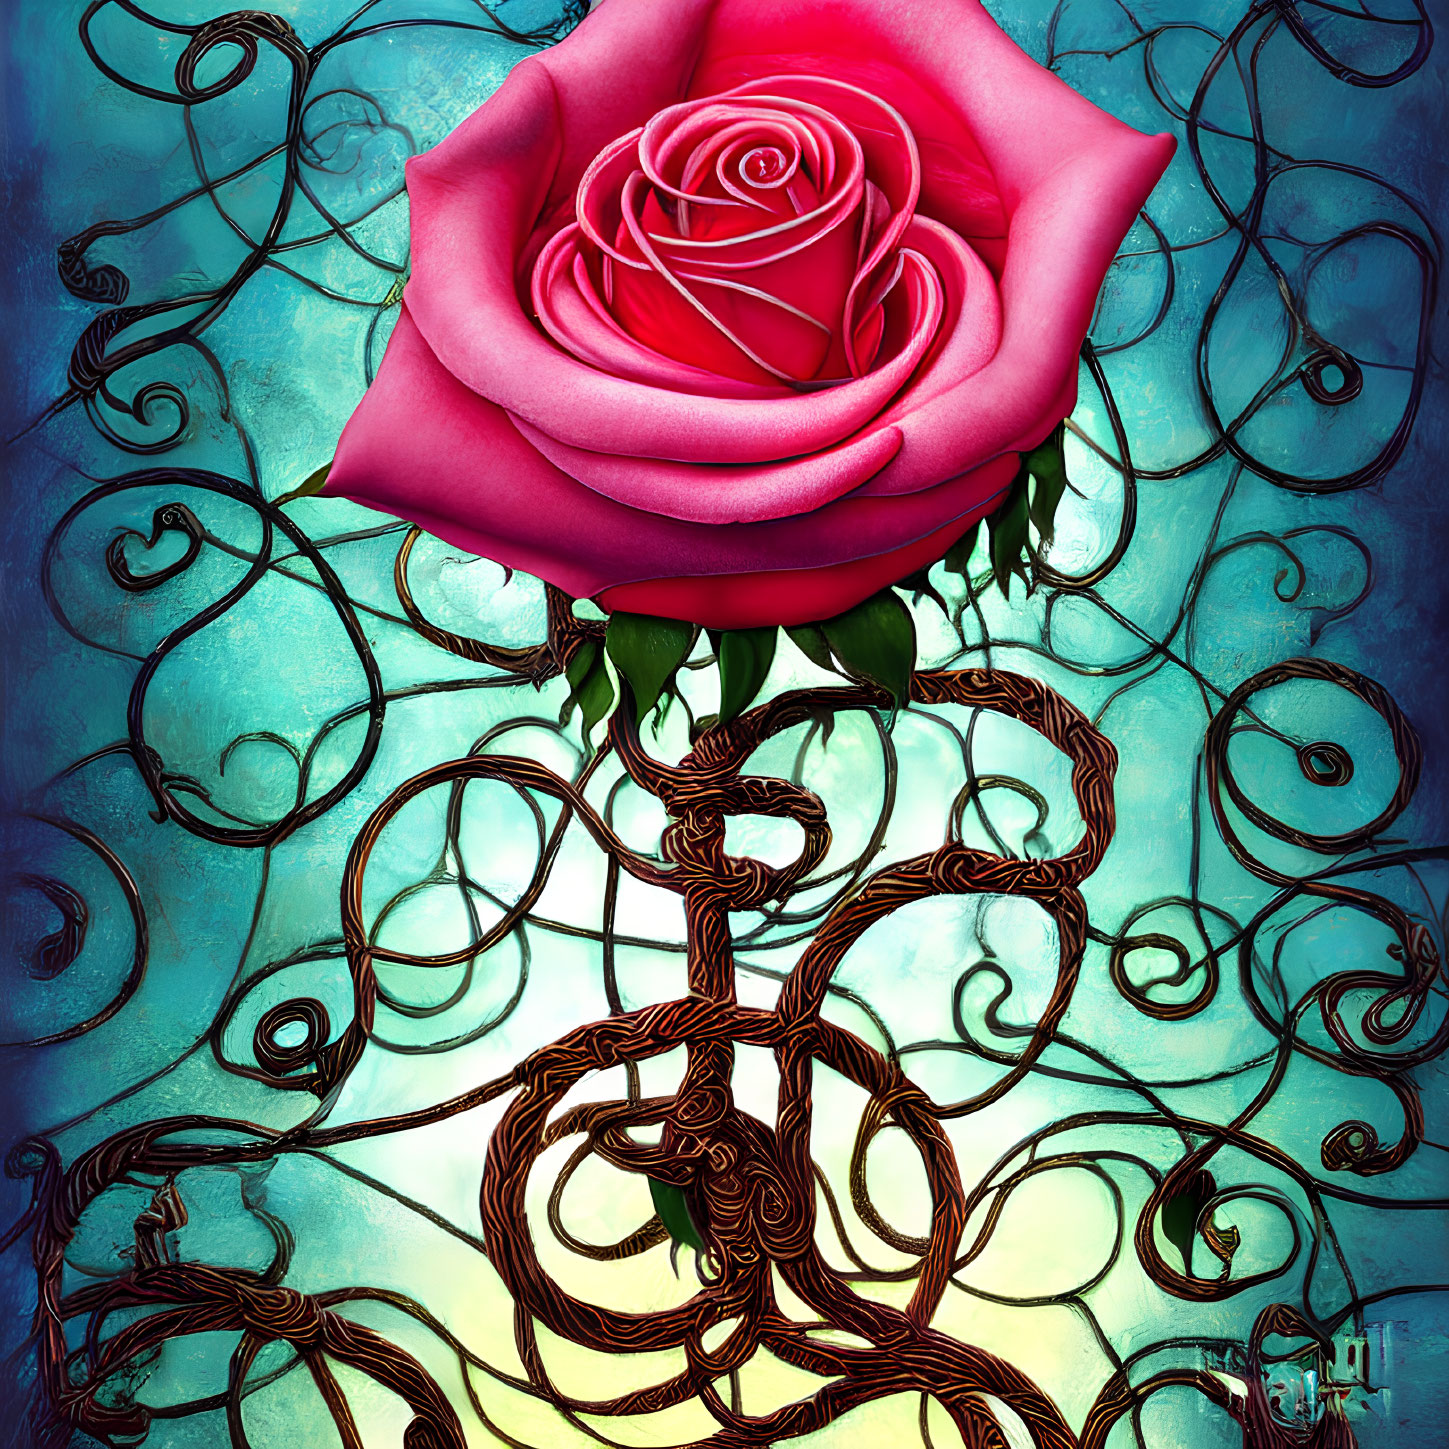 Vibrant pink rose with twisted stem on teal background